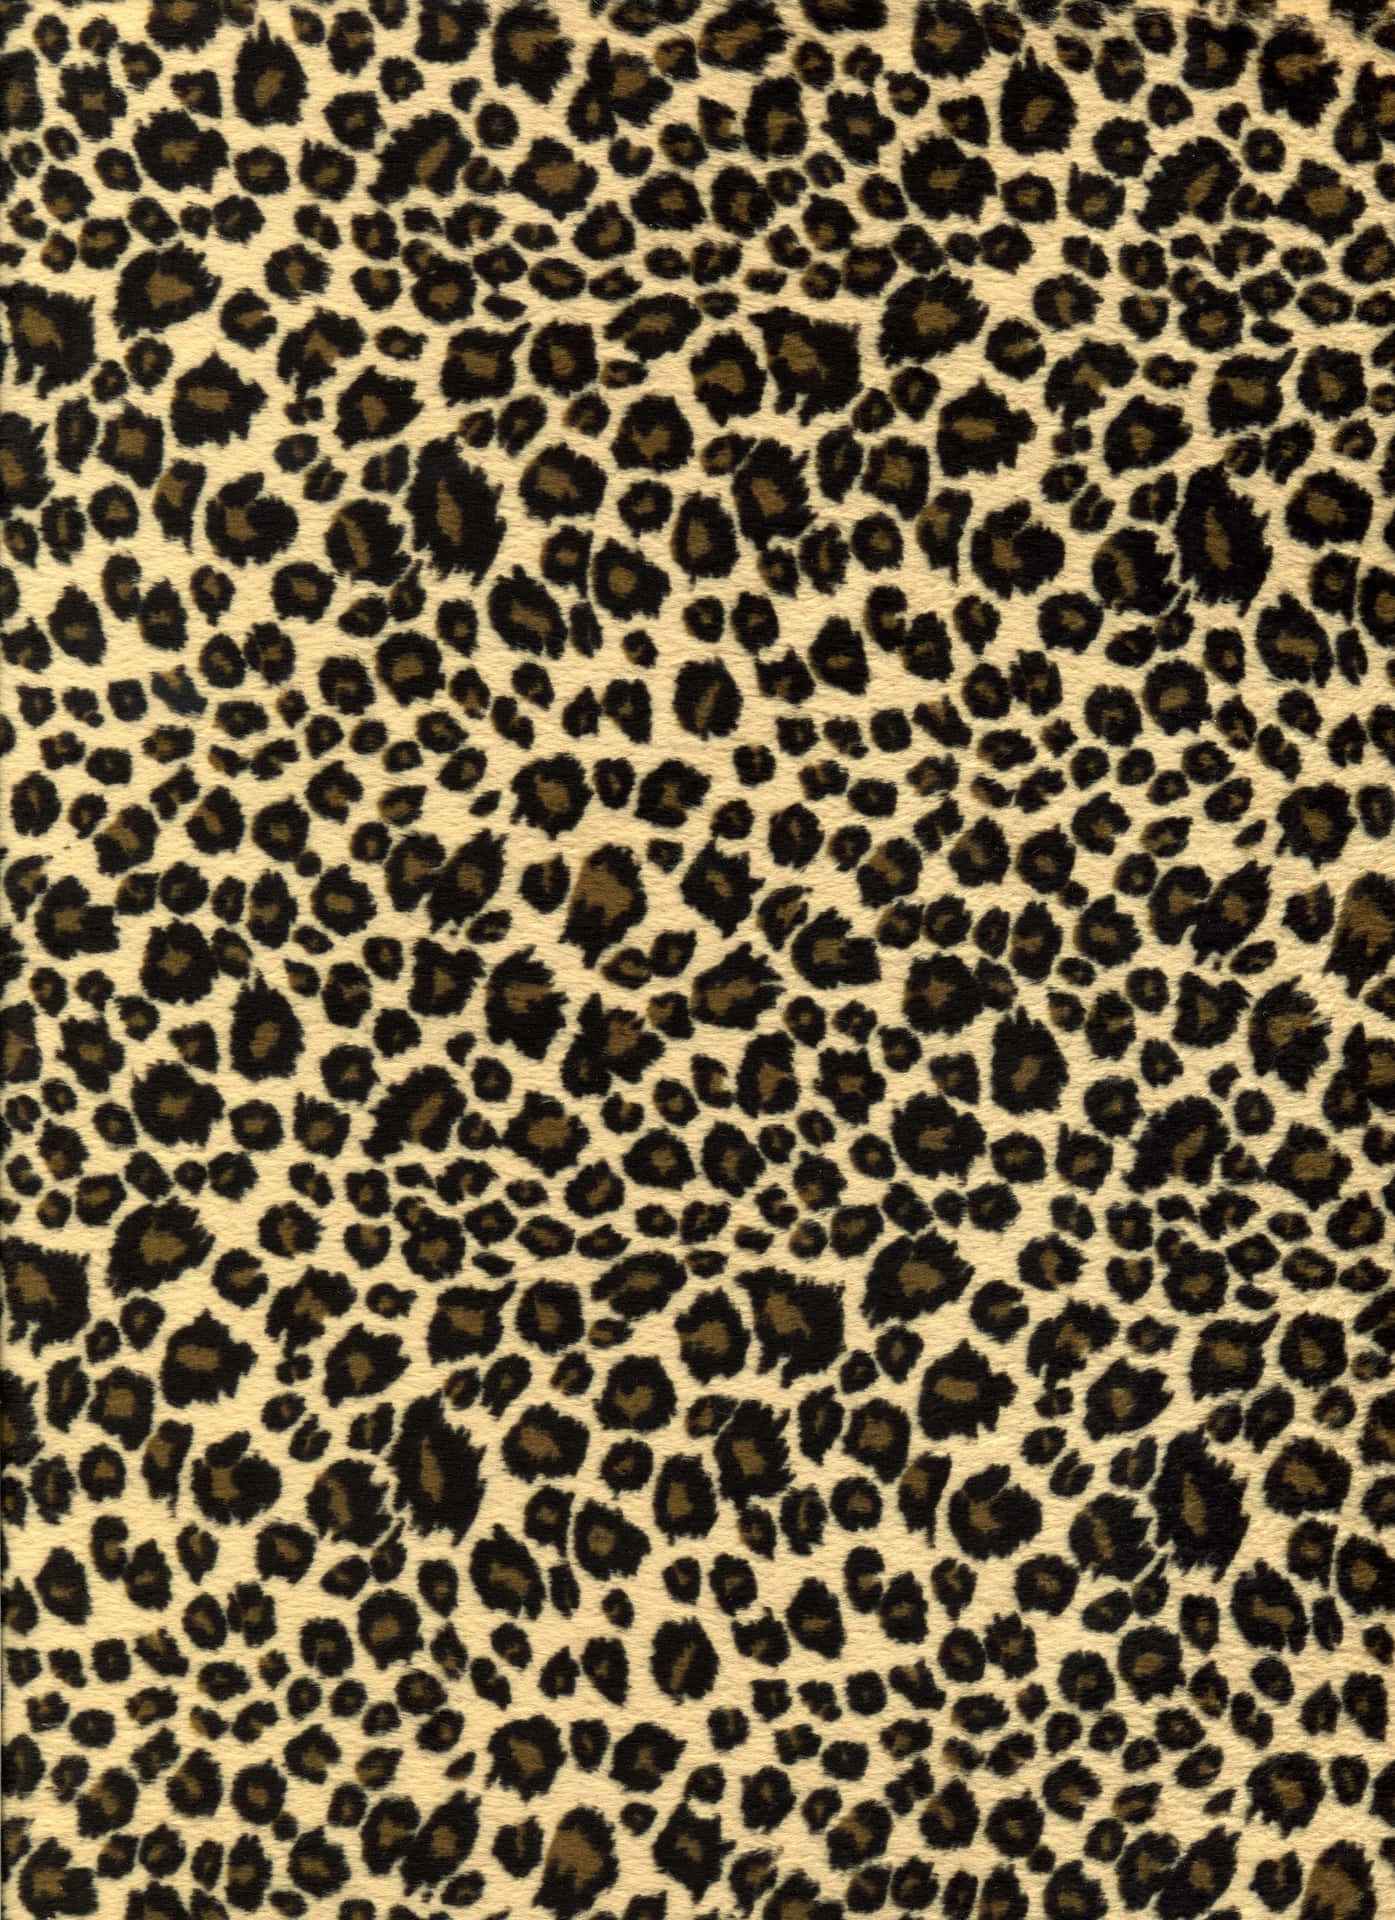 A Leopard Print Fabric With Black And Brown Stripes Wallpaper